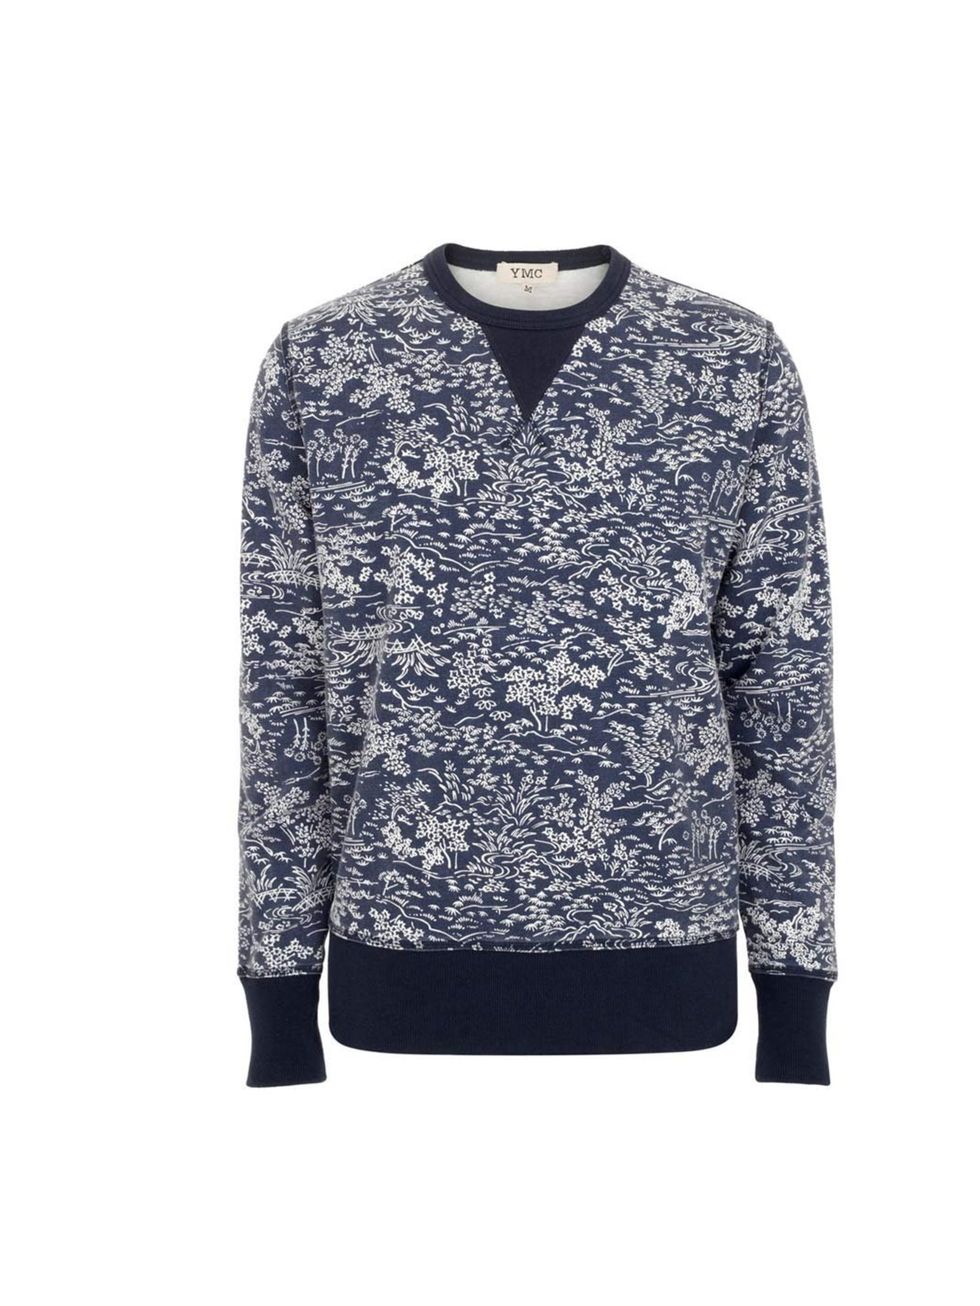 <p>The sweatshirt is big news this season, and we love the contrasting boxy shape and delicate floral print of this navy number.</p><p>YMC sweatshirt, £60 at <a href="http://www.flannels.com/ymc-crew-neck-sweatshirt-554853?awc=3805_1371556934_518576197cae